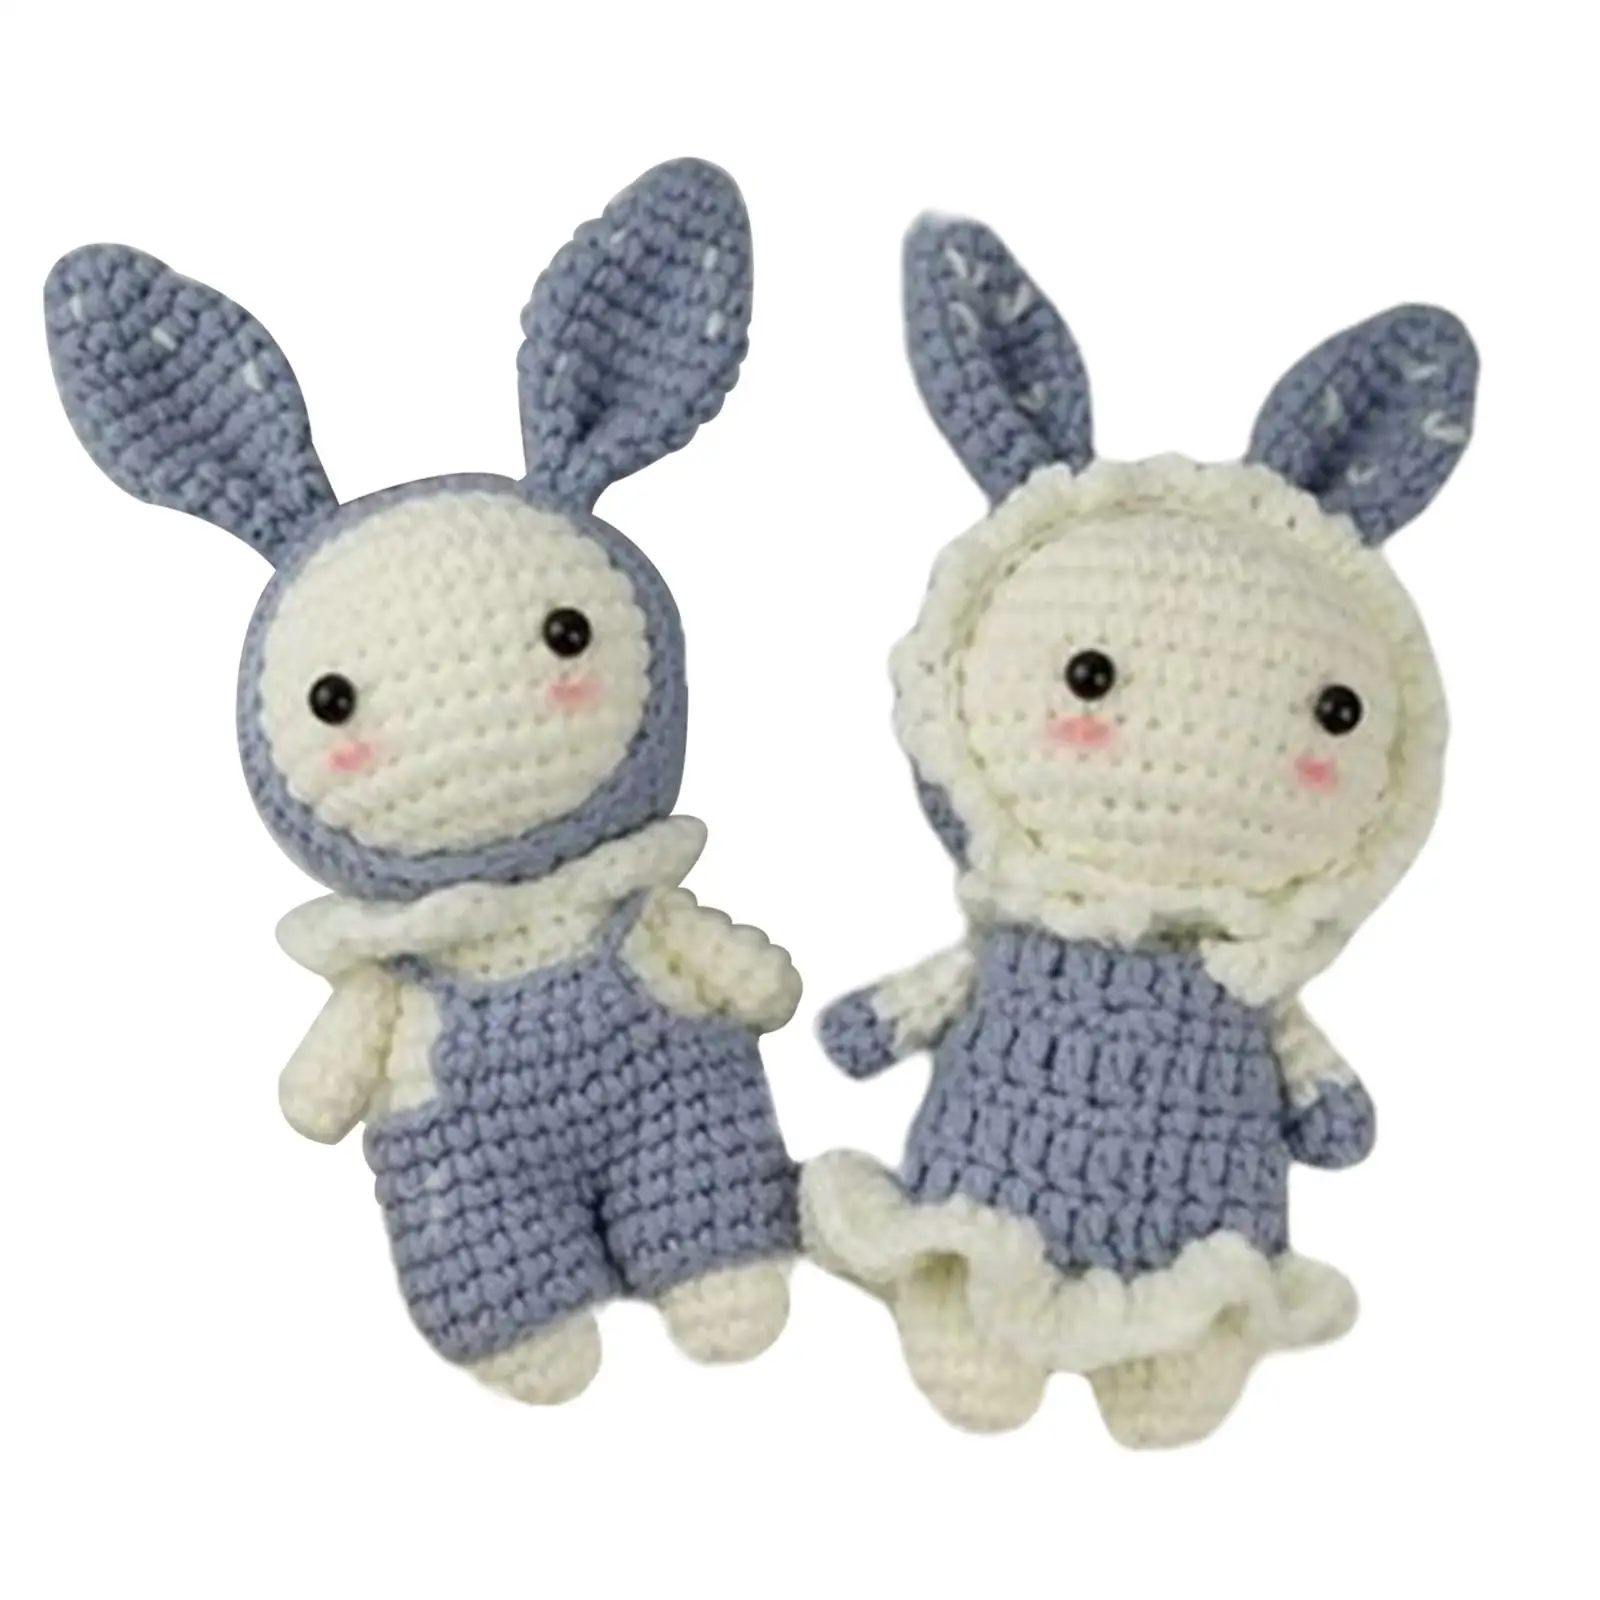 Complete Beginner Crochet Set Rabbits Crochet Craft Set Needlework Includes Yarn, Hook, Accessories Baby Toy for Adults Gift